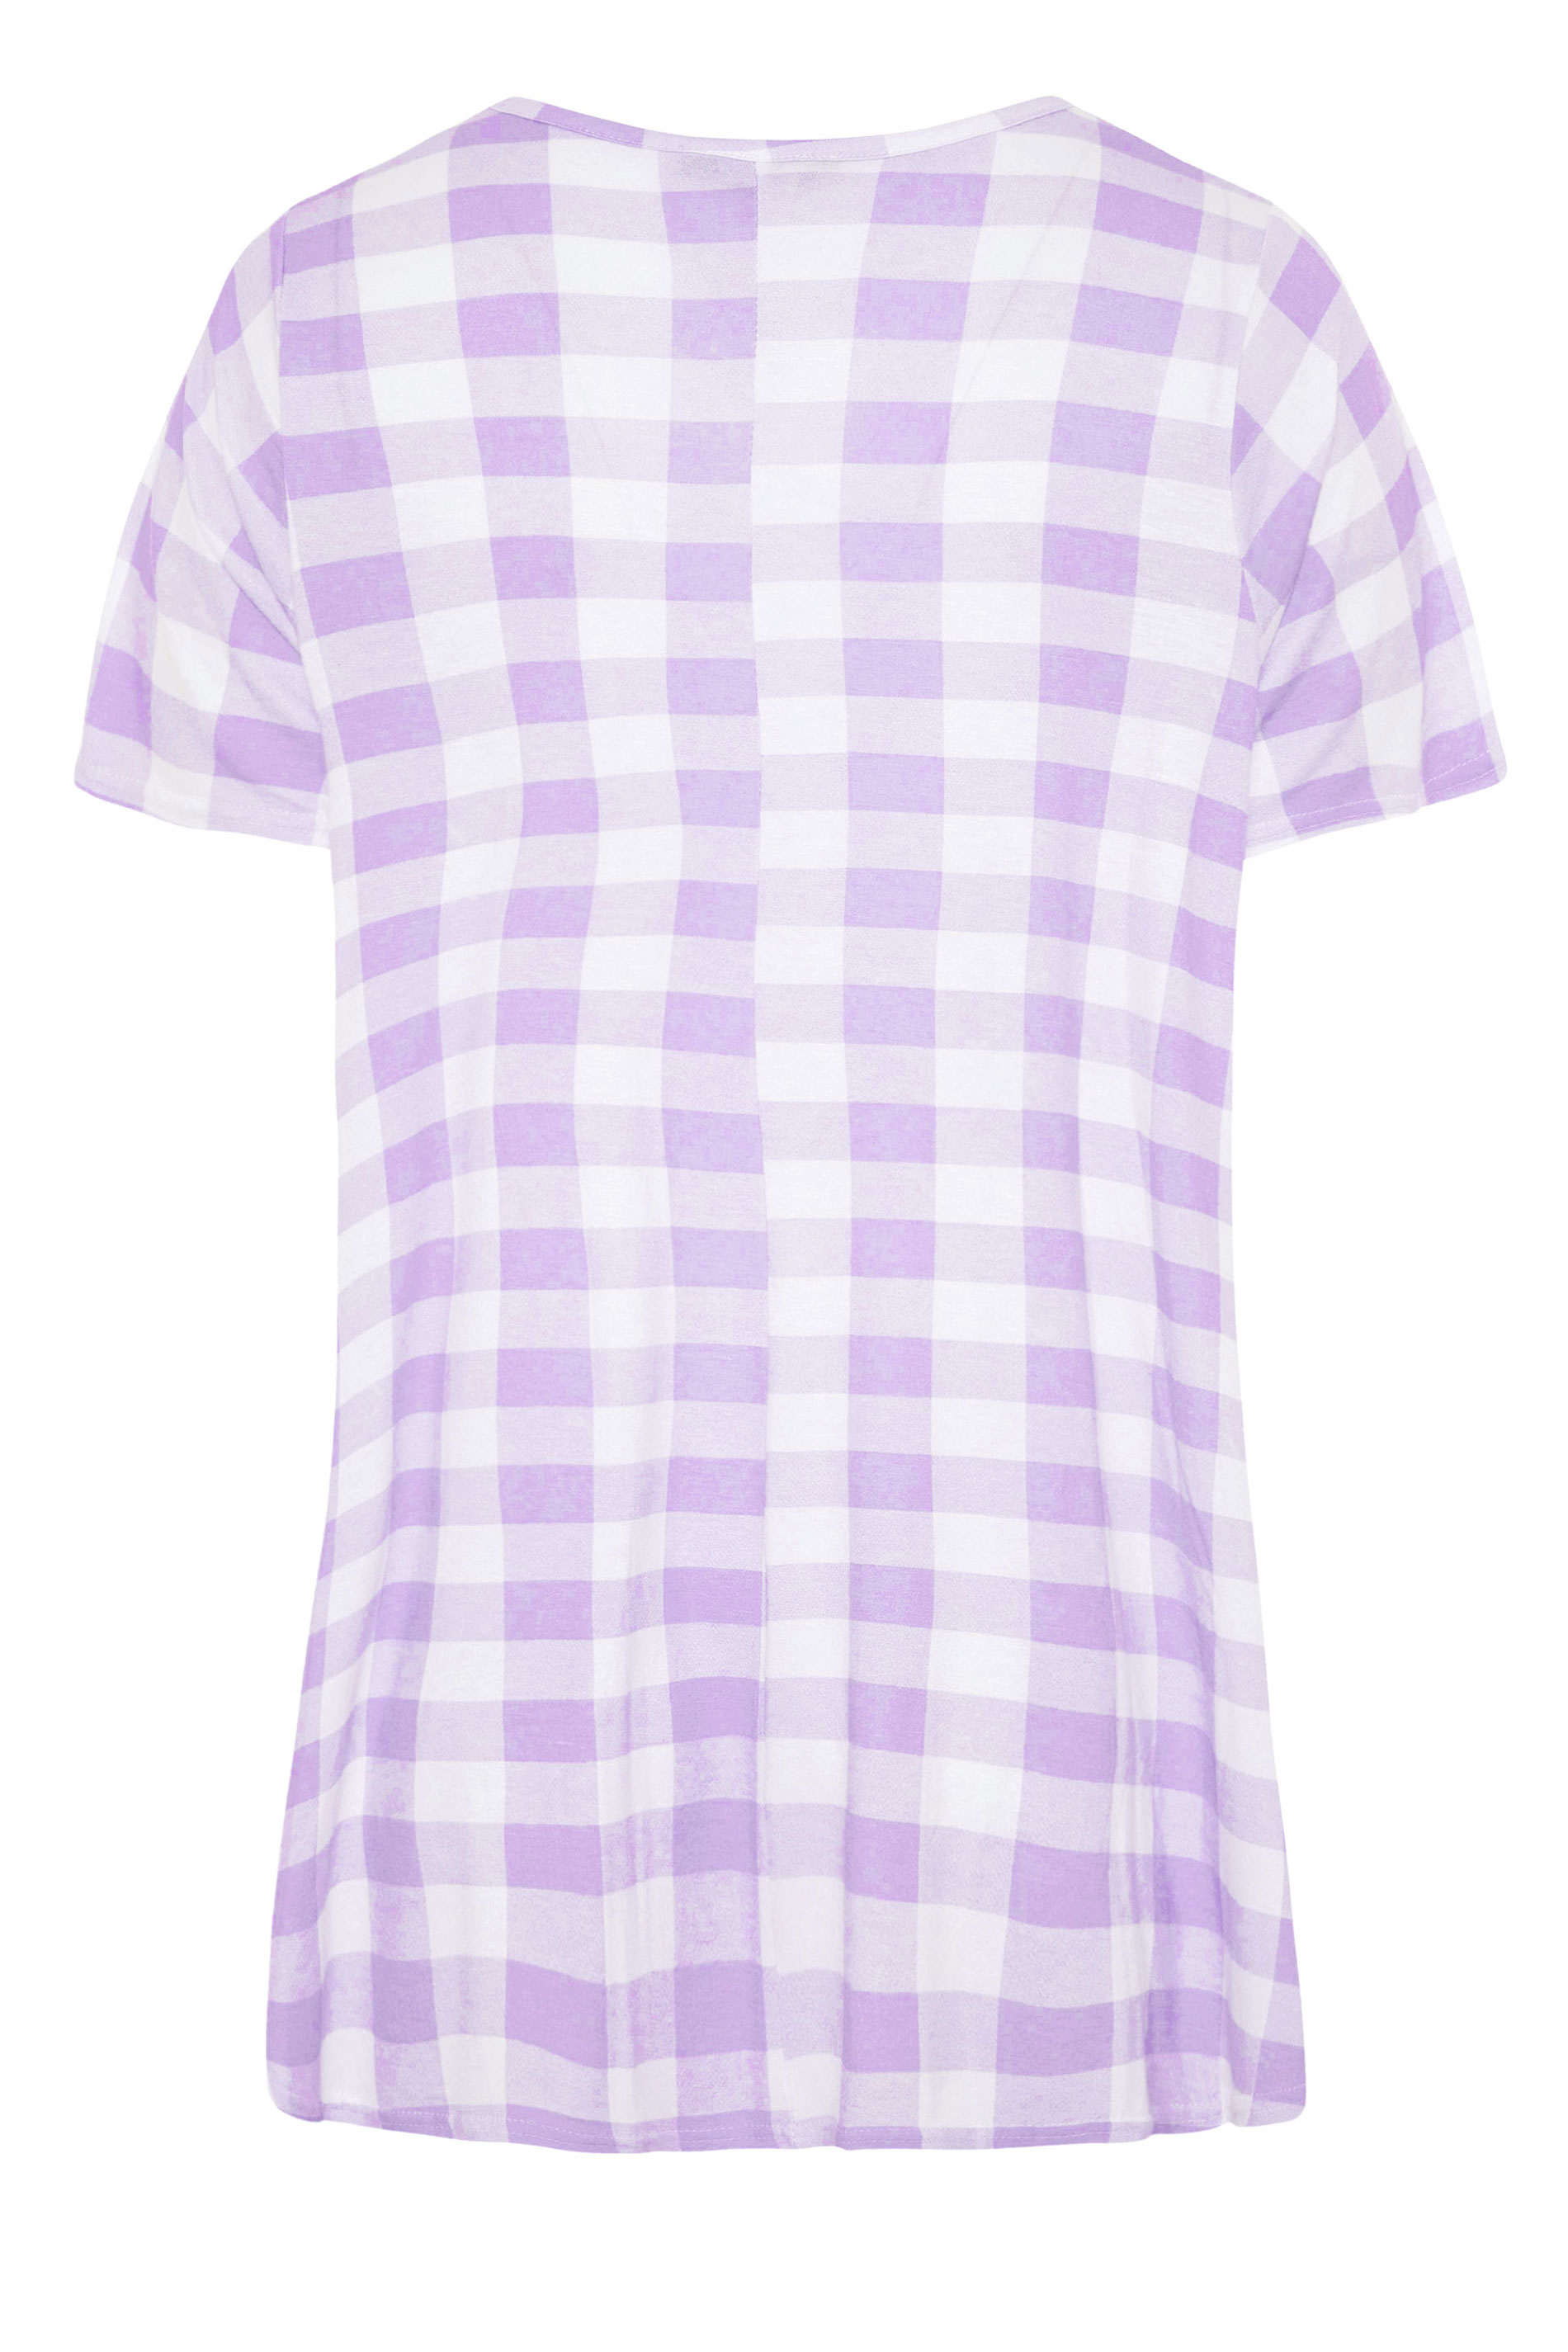 Plus Size LIMITED COLLECTION Purple Gingham Check Swing T-Shirt | Yours ...